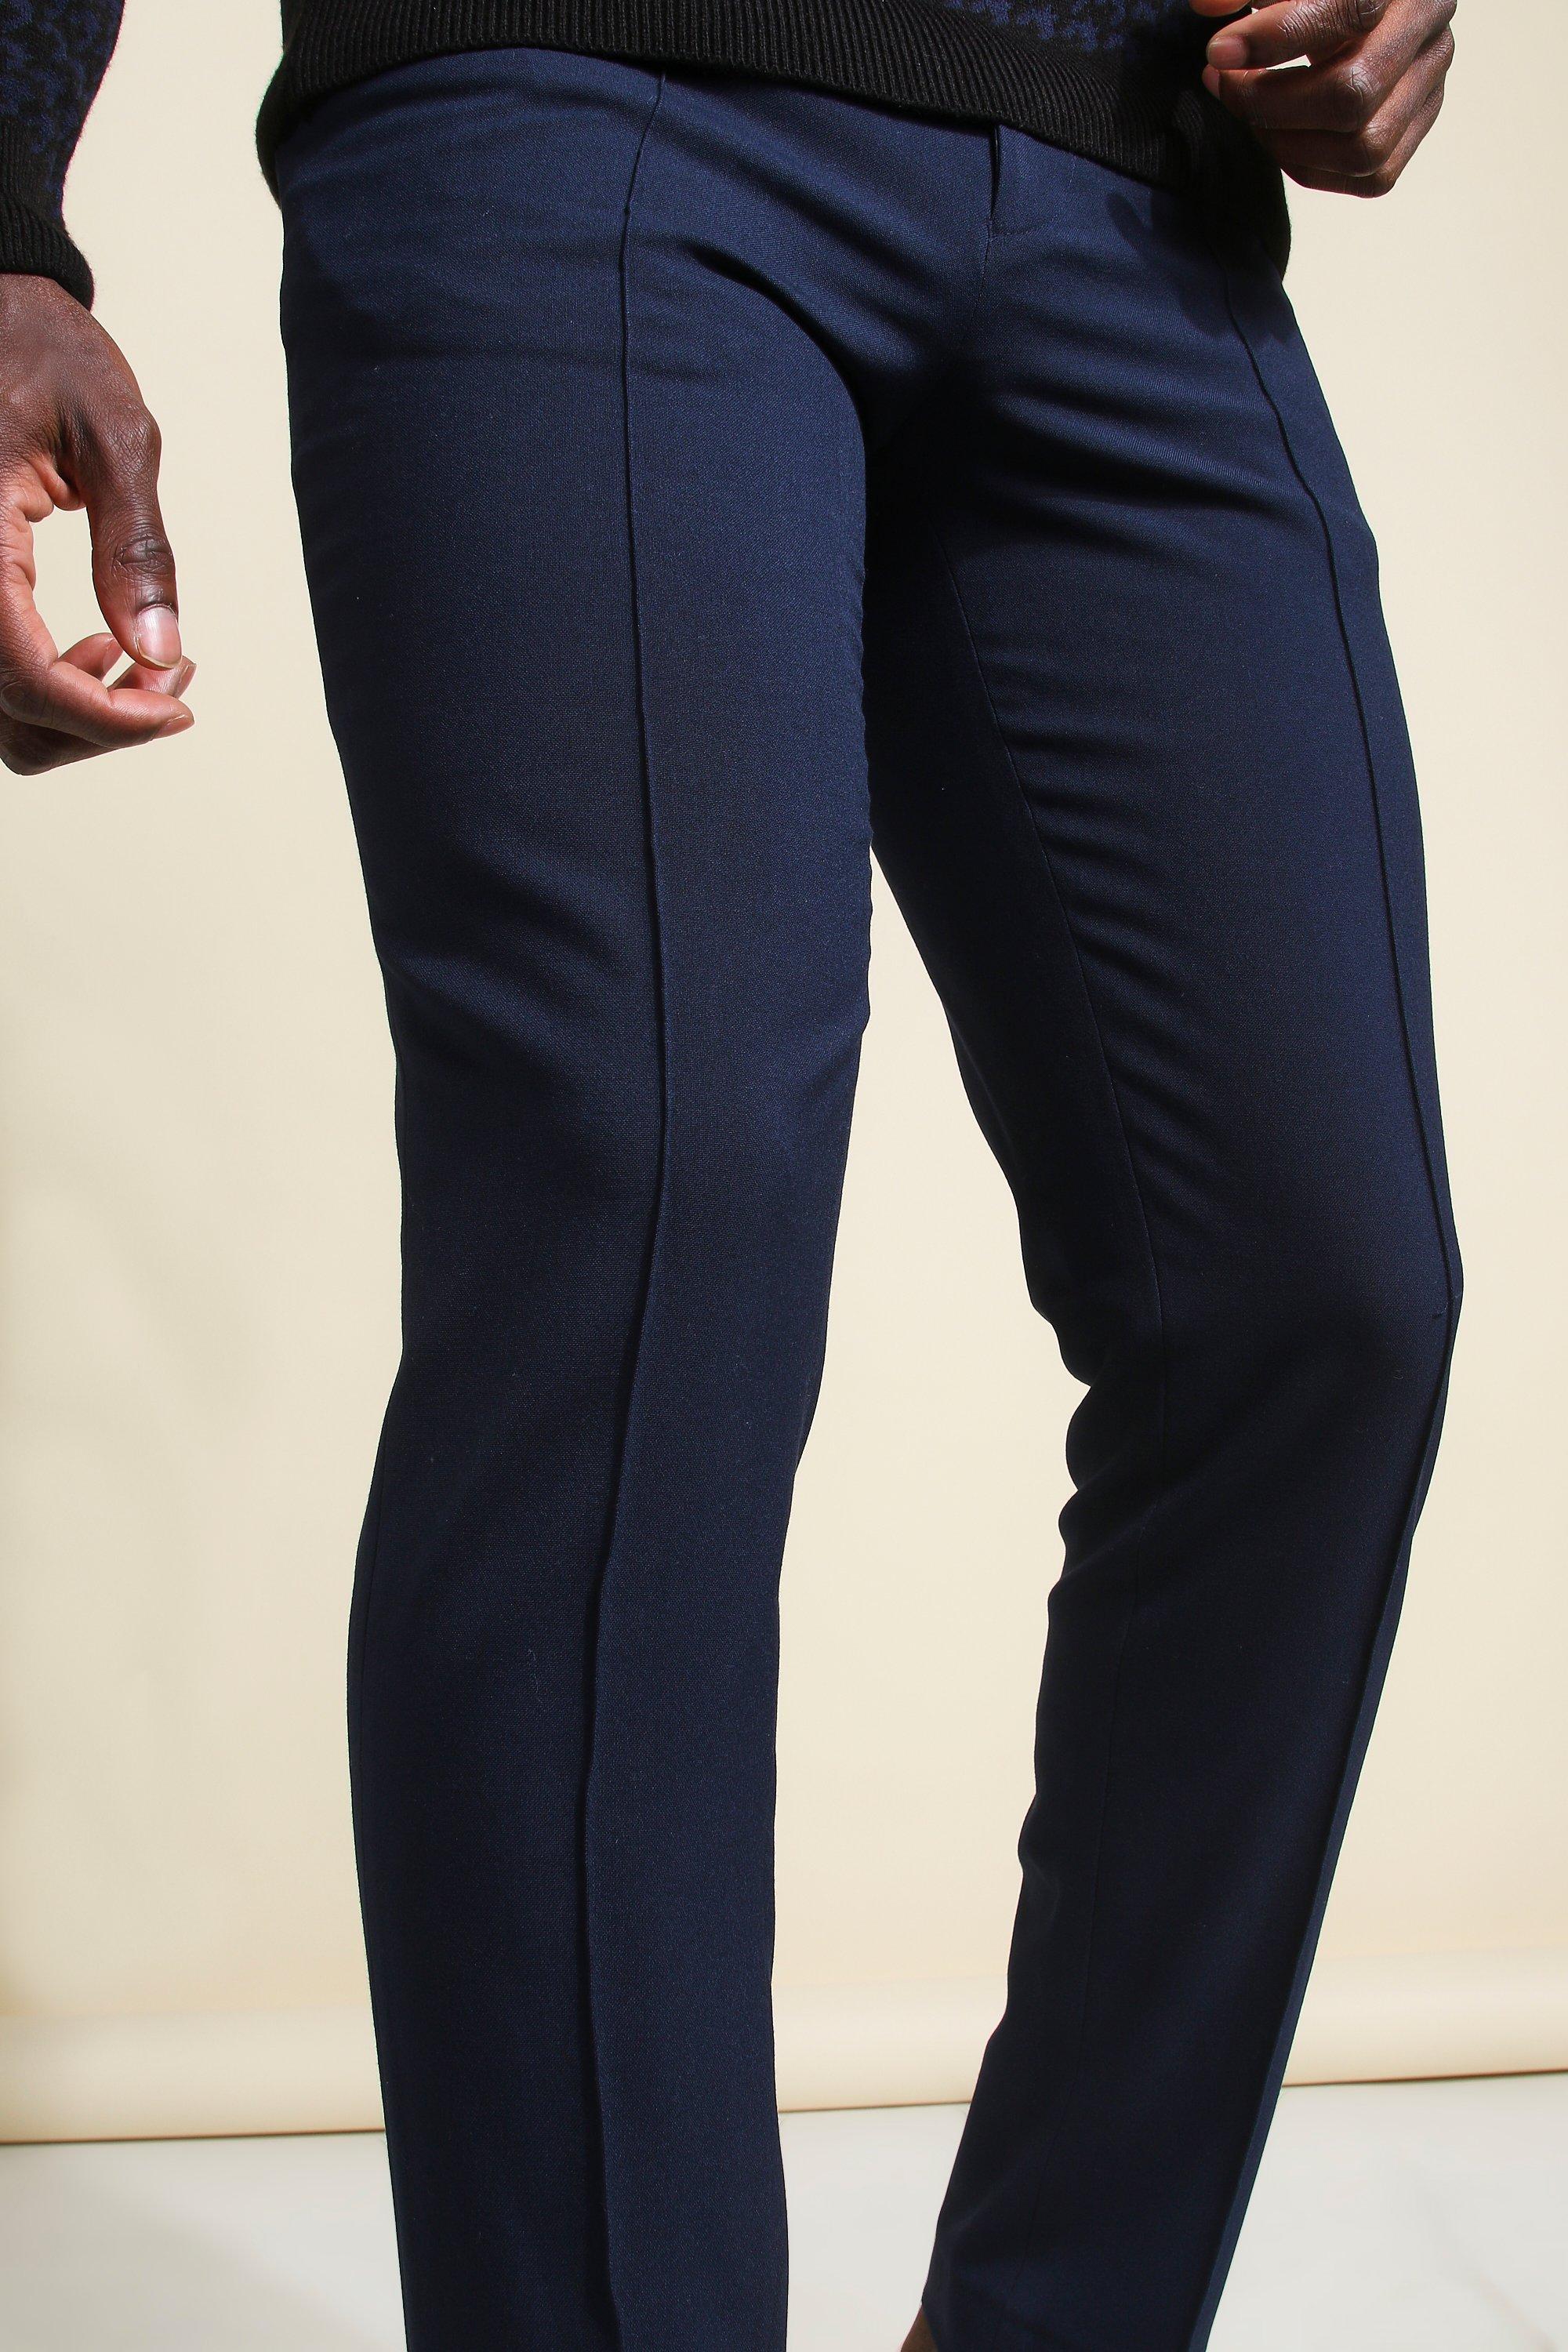 Super Skinny 4 Way Stretch Tailored Trouser